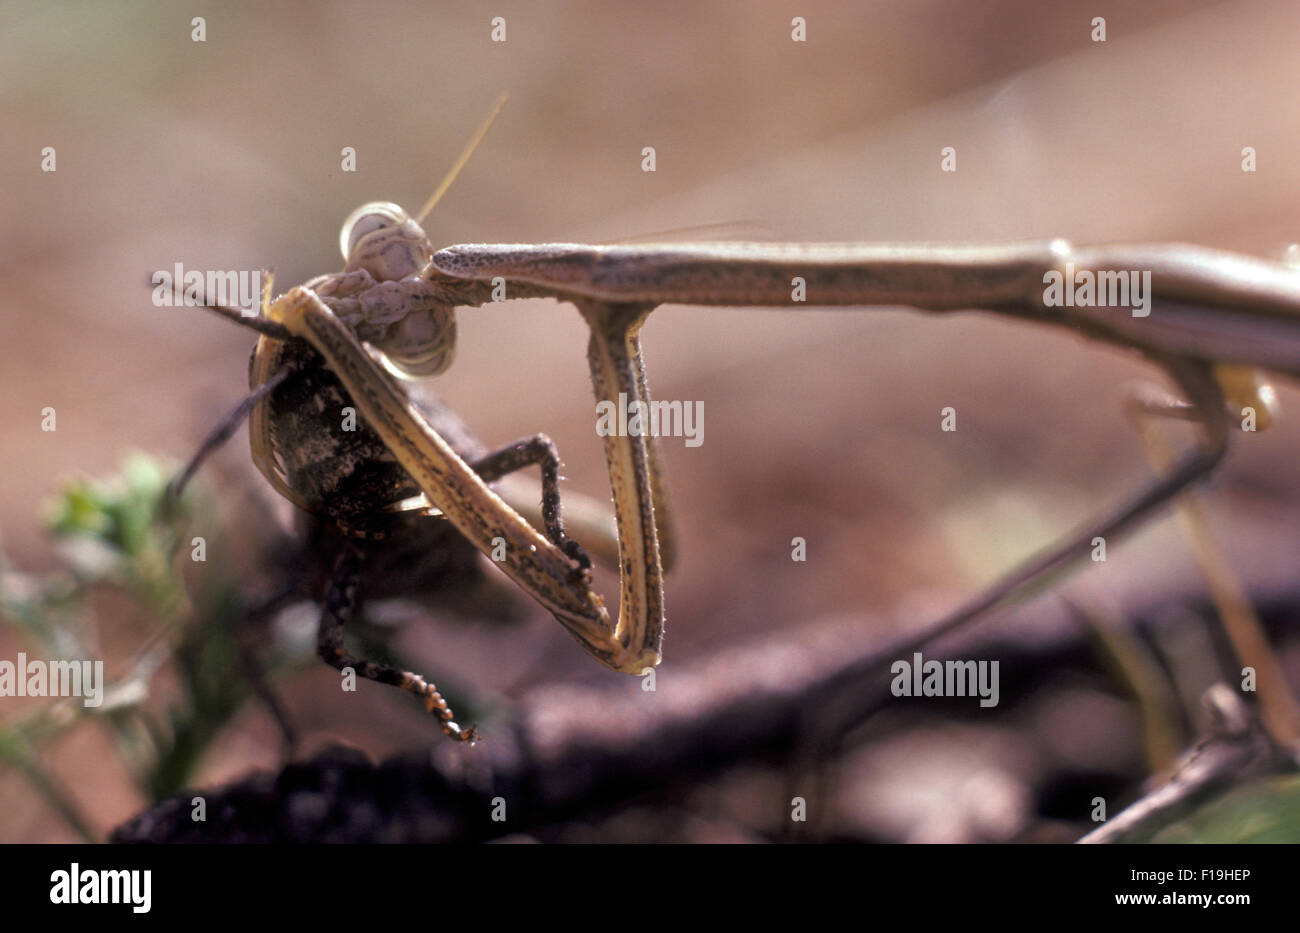 PRAYING MANTID EATING A CRICKET, THE MAJORITY OF MANTIDS FEED UPON LIVE PREY WITHIN THEIR REACH. Stock Photo